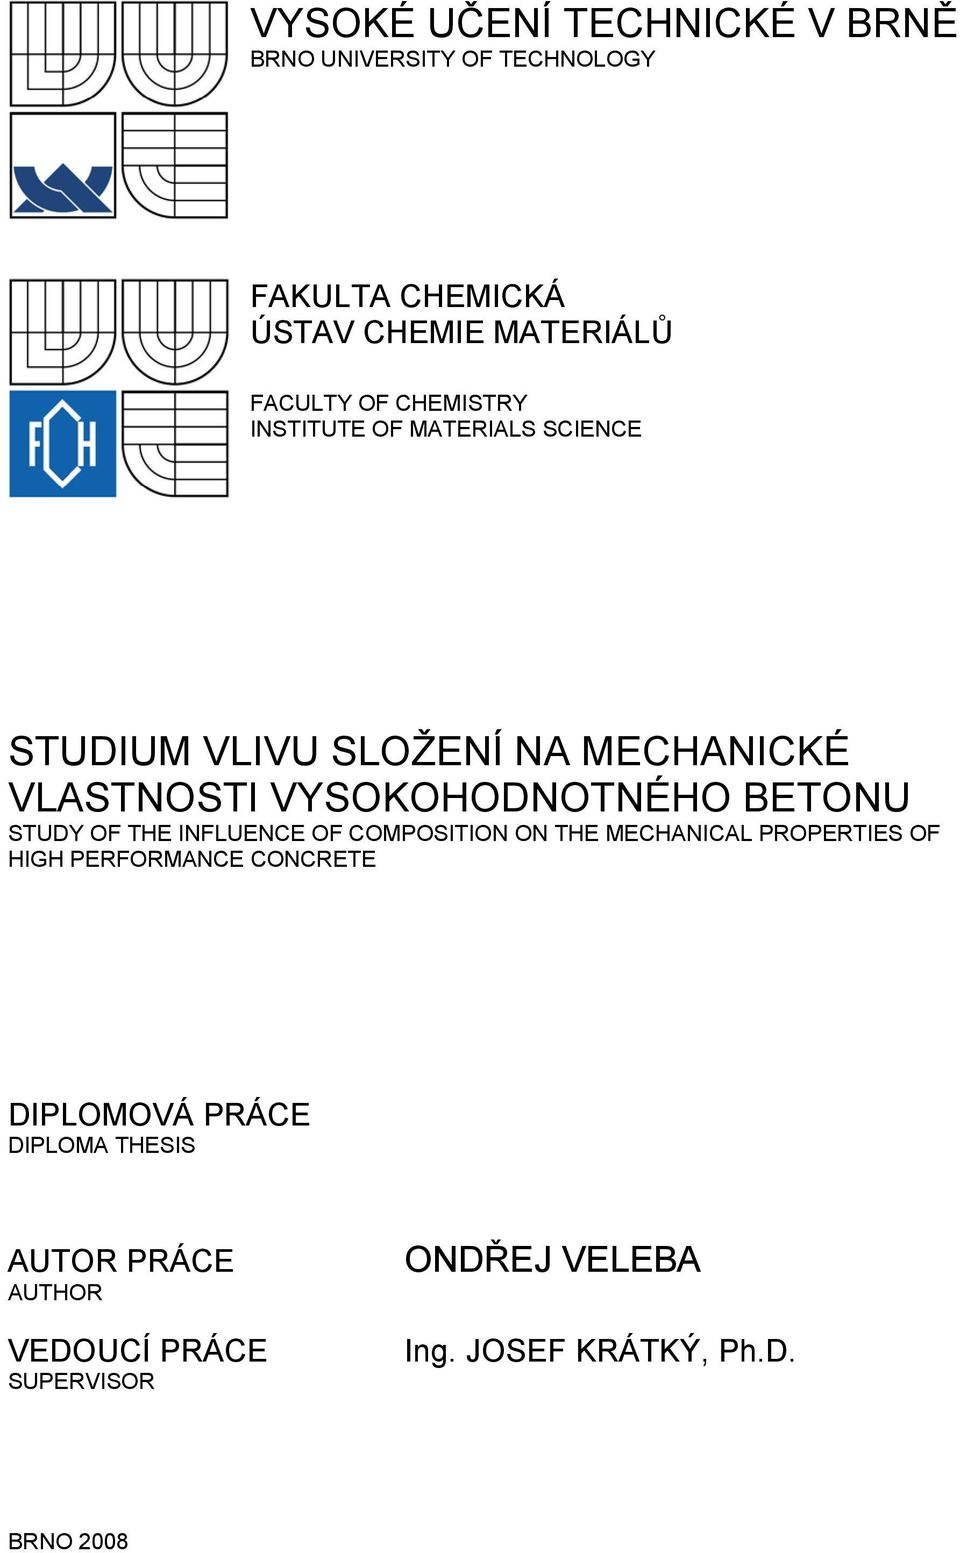 BETONU STUDY OF THE INFLUENCE OF COMPOSITION ON THE MECHANICAL PROPERTIES OF HIGH PERFORMANCE CONCRETE